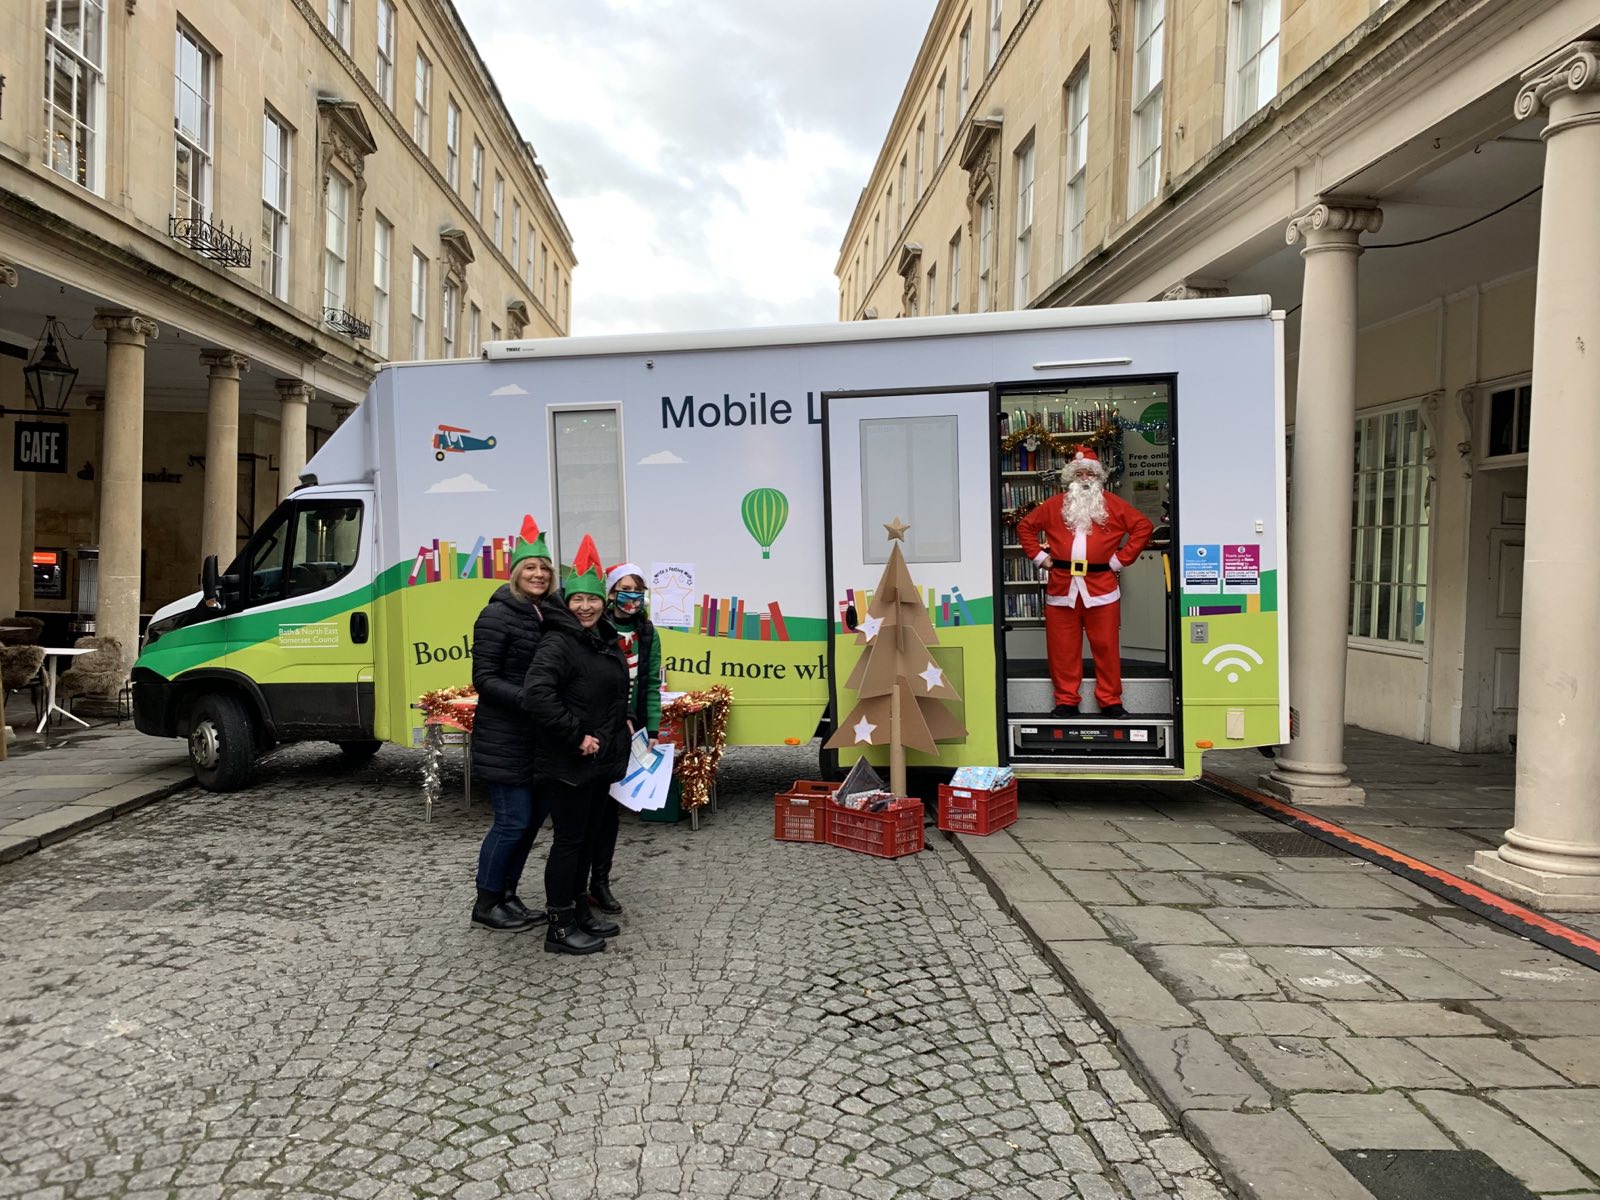 The mobile library in central Bath